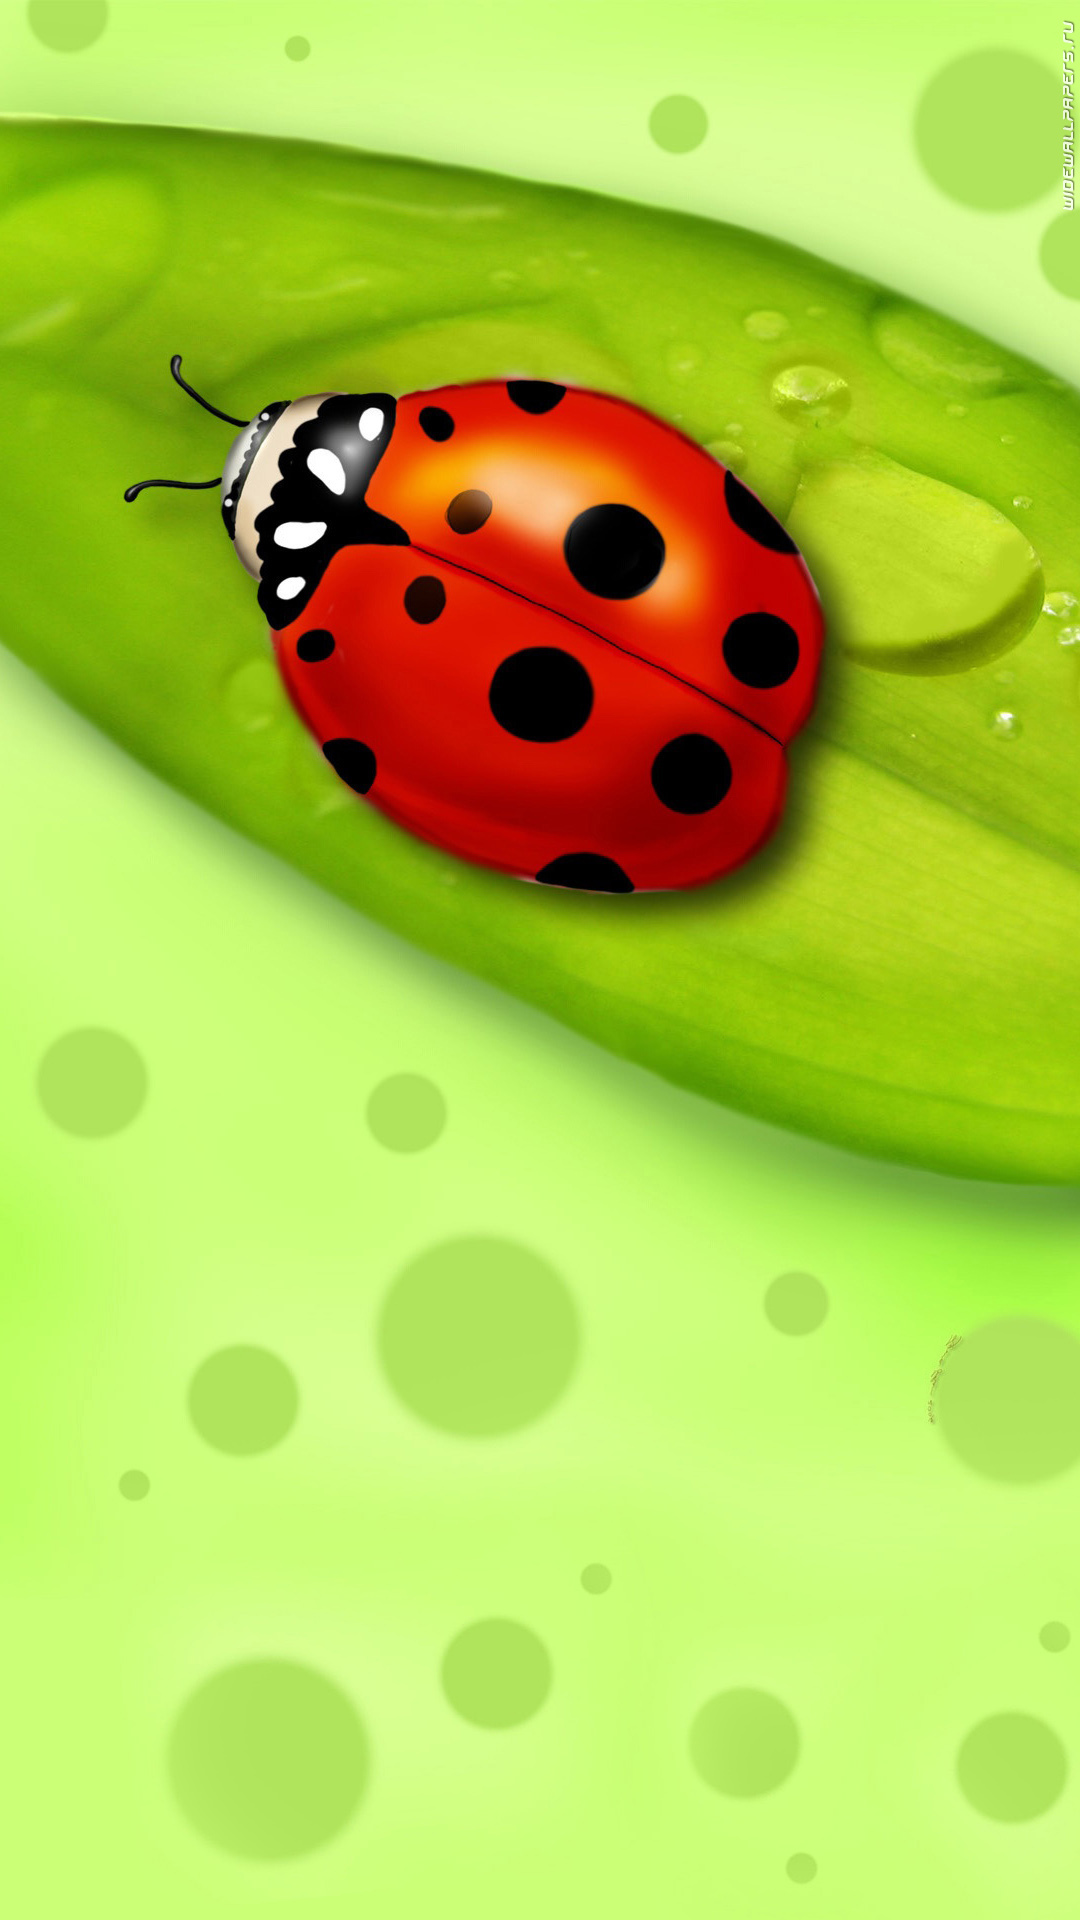 pictures, insects, ladybugs, green